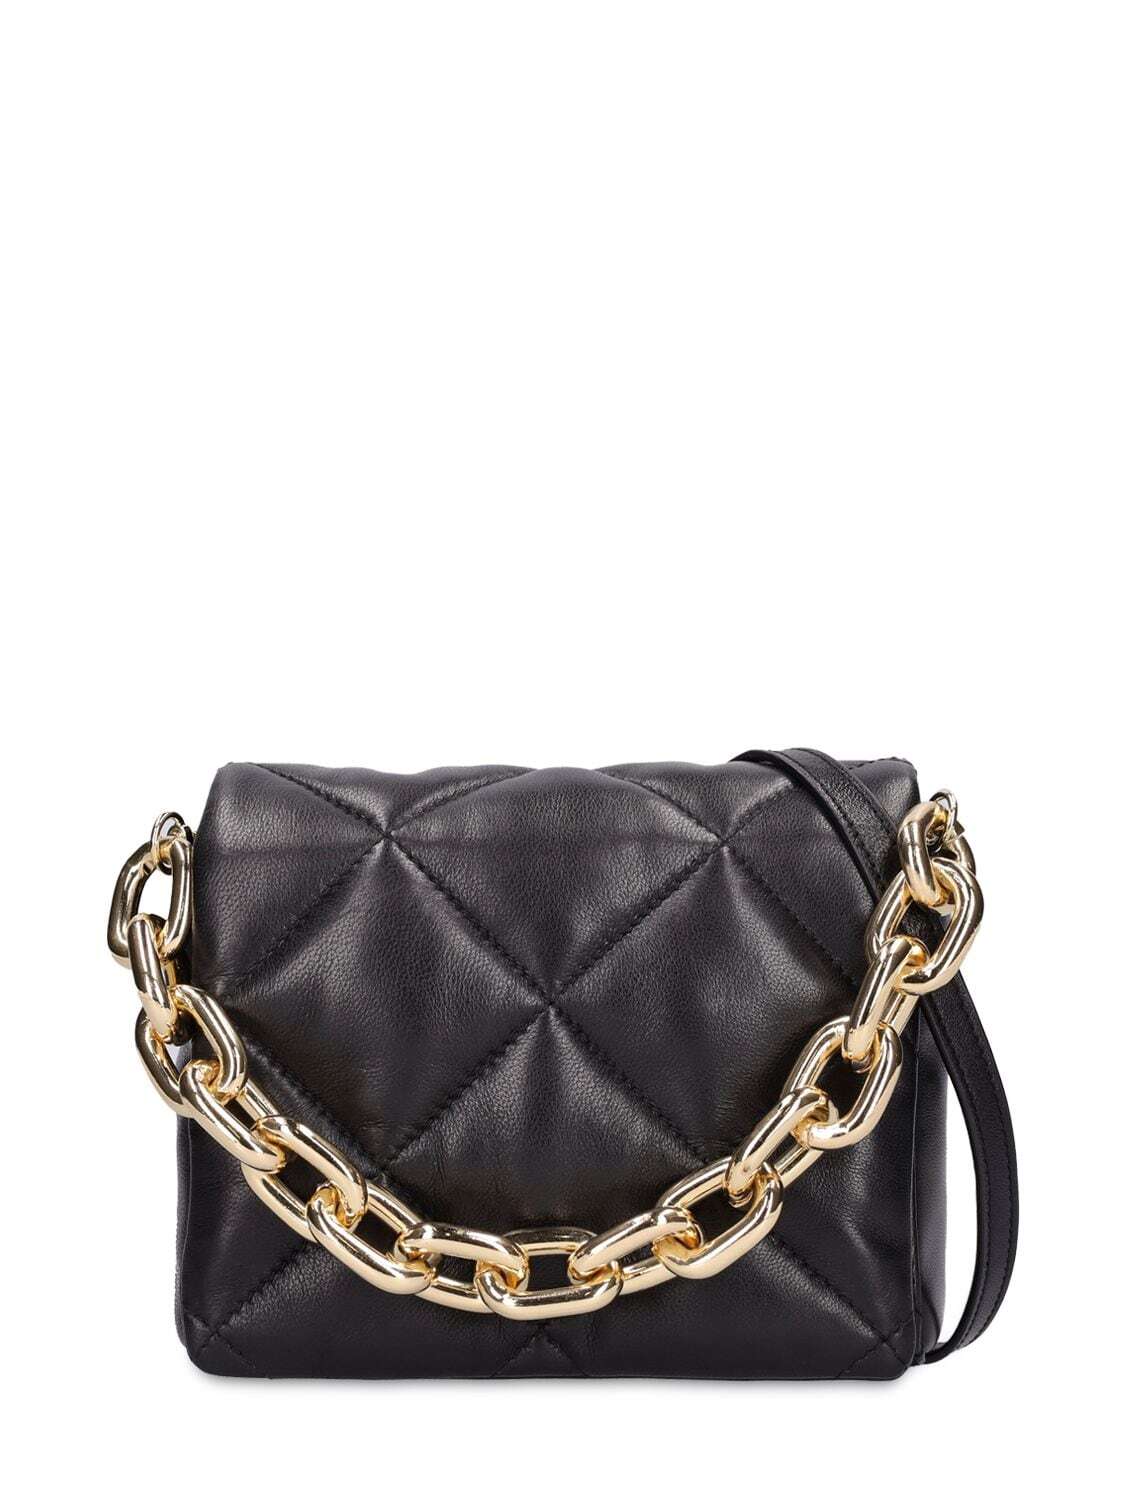 STAND STUDIO Hestia Quilted Leather Shoulder Bag in black / gold